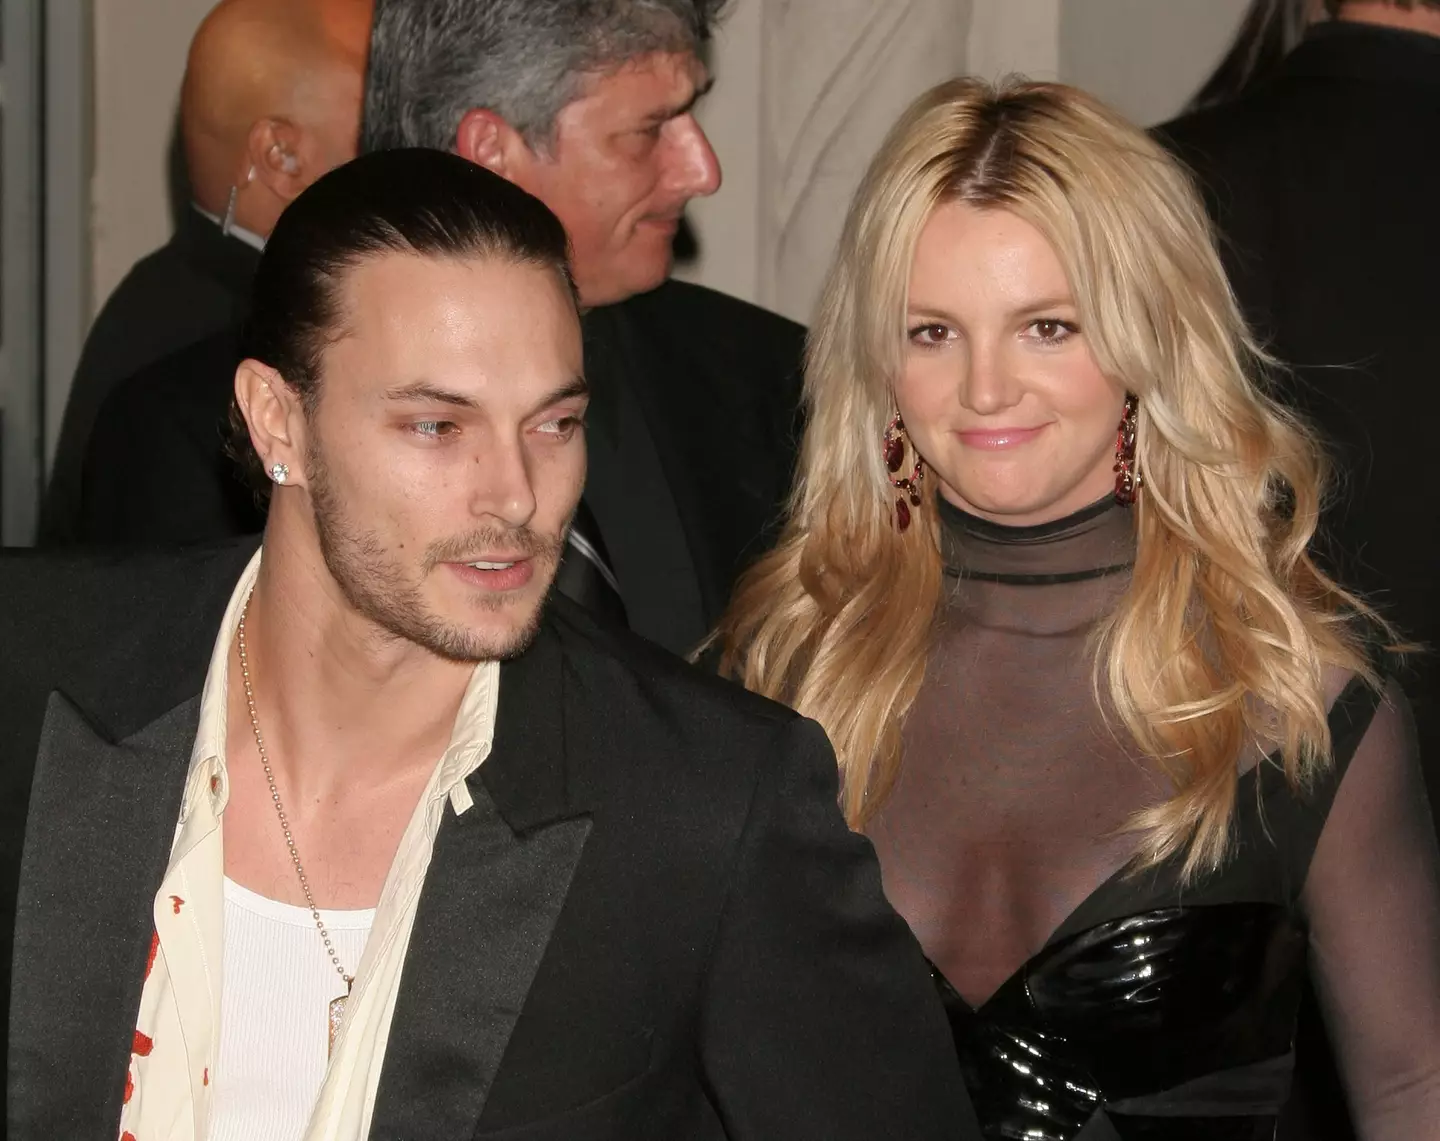 Kevin Federline was married to Britney Spears from 2004 to 2007.